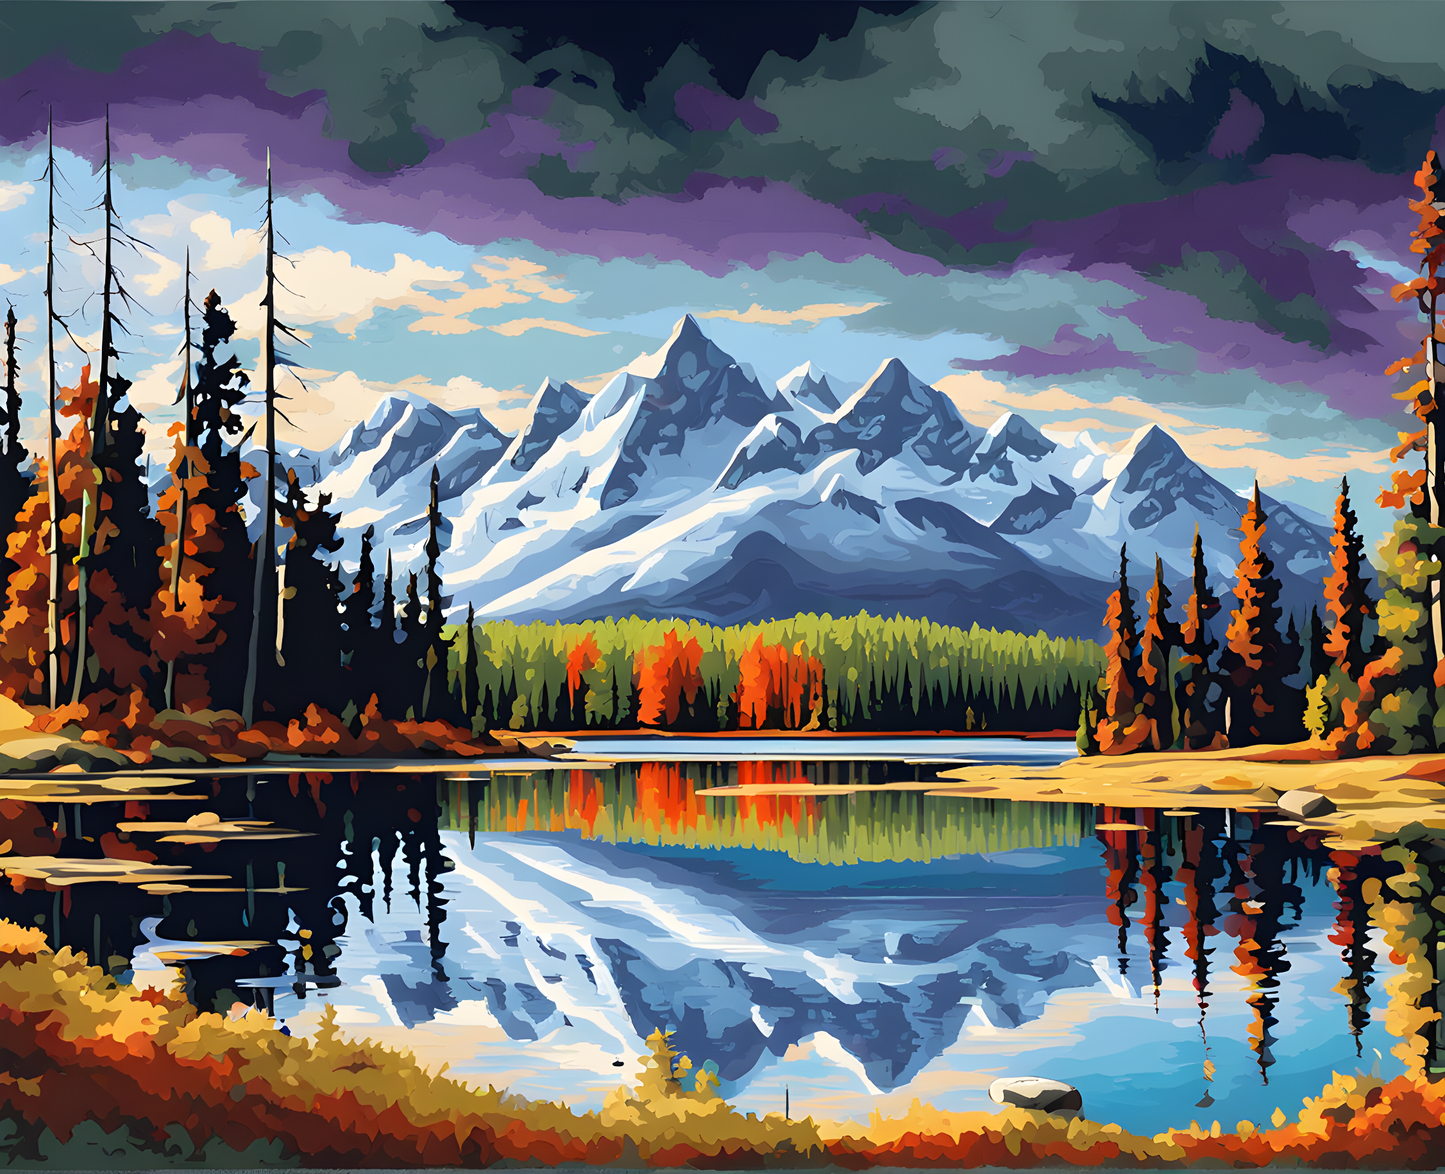 National Parks Collection PD (65) - Jasper Park, Canada - Paint-By-Number Kit